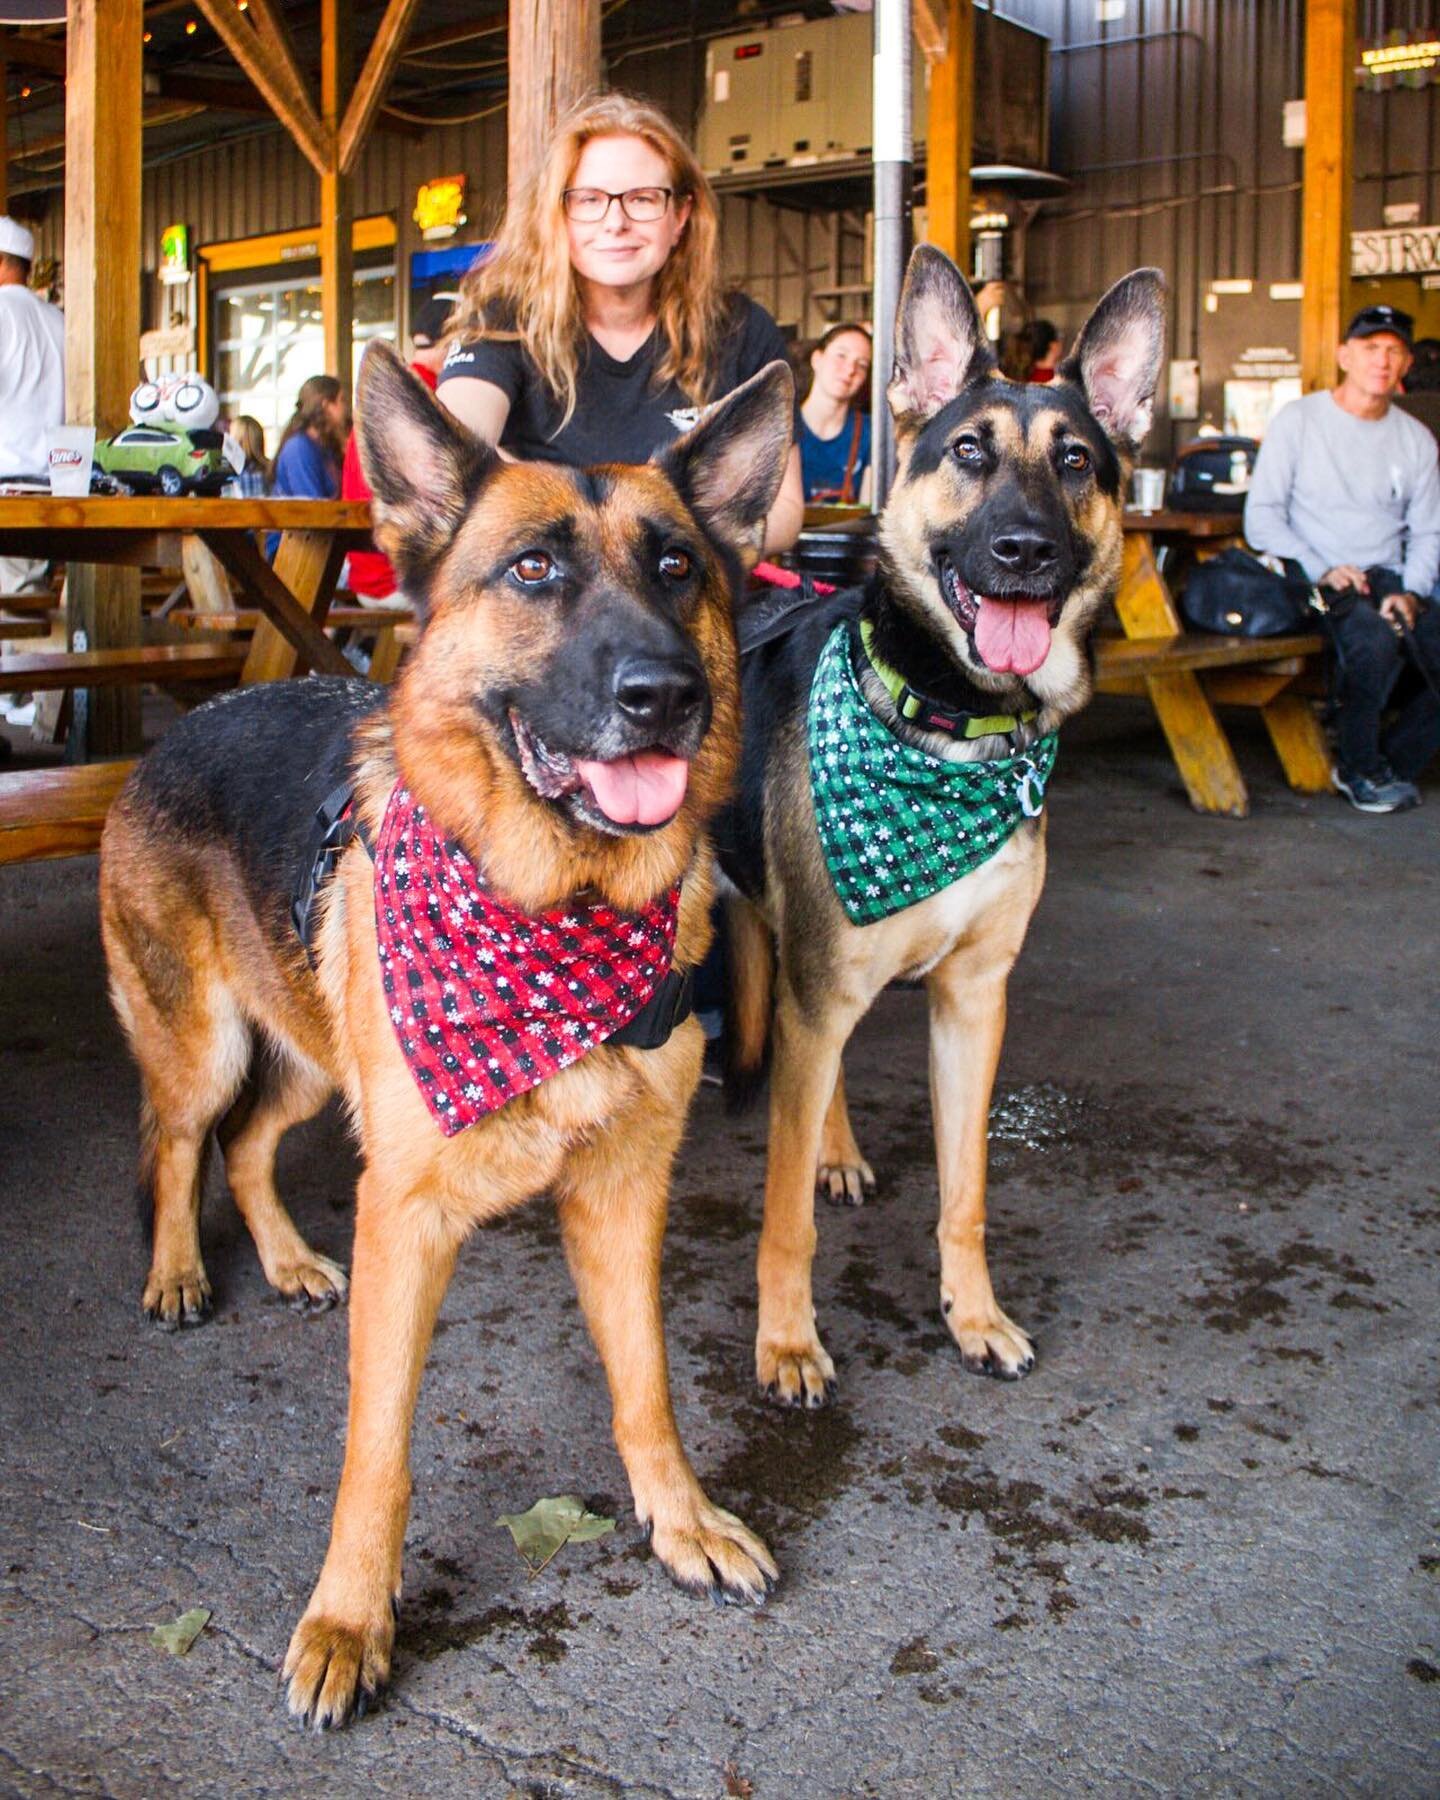 At the @ghgsdr 9th annual Bark and Brew today! So many good doggos today at @karbachbrewing back in my hometown of Houston!
&bull;
#germanshepherd #htxdogs #animalphotographer #texasphotograpger